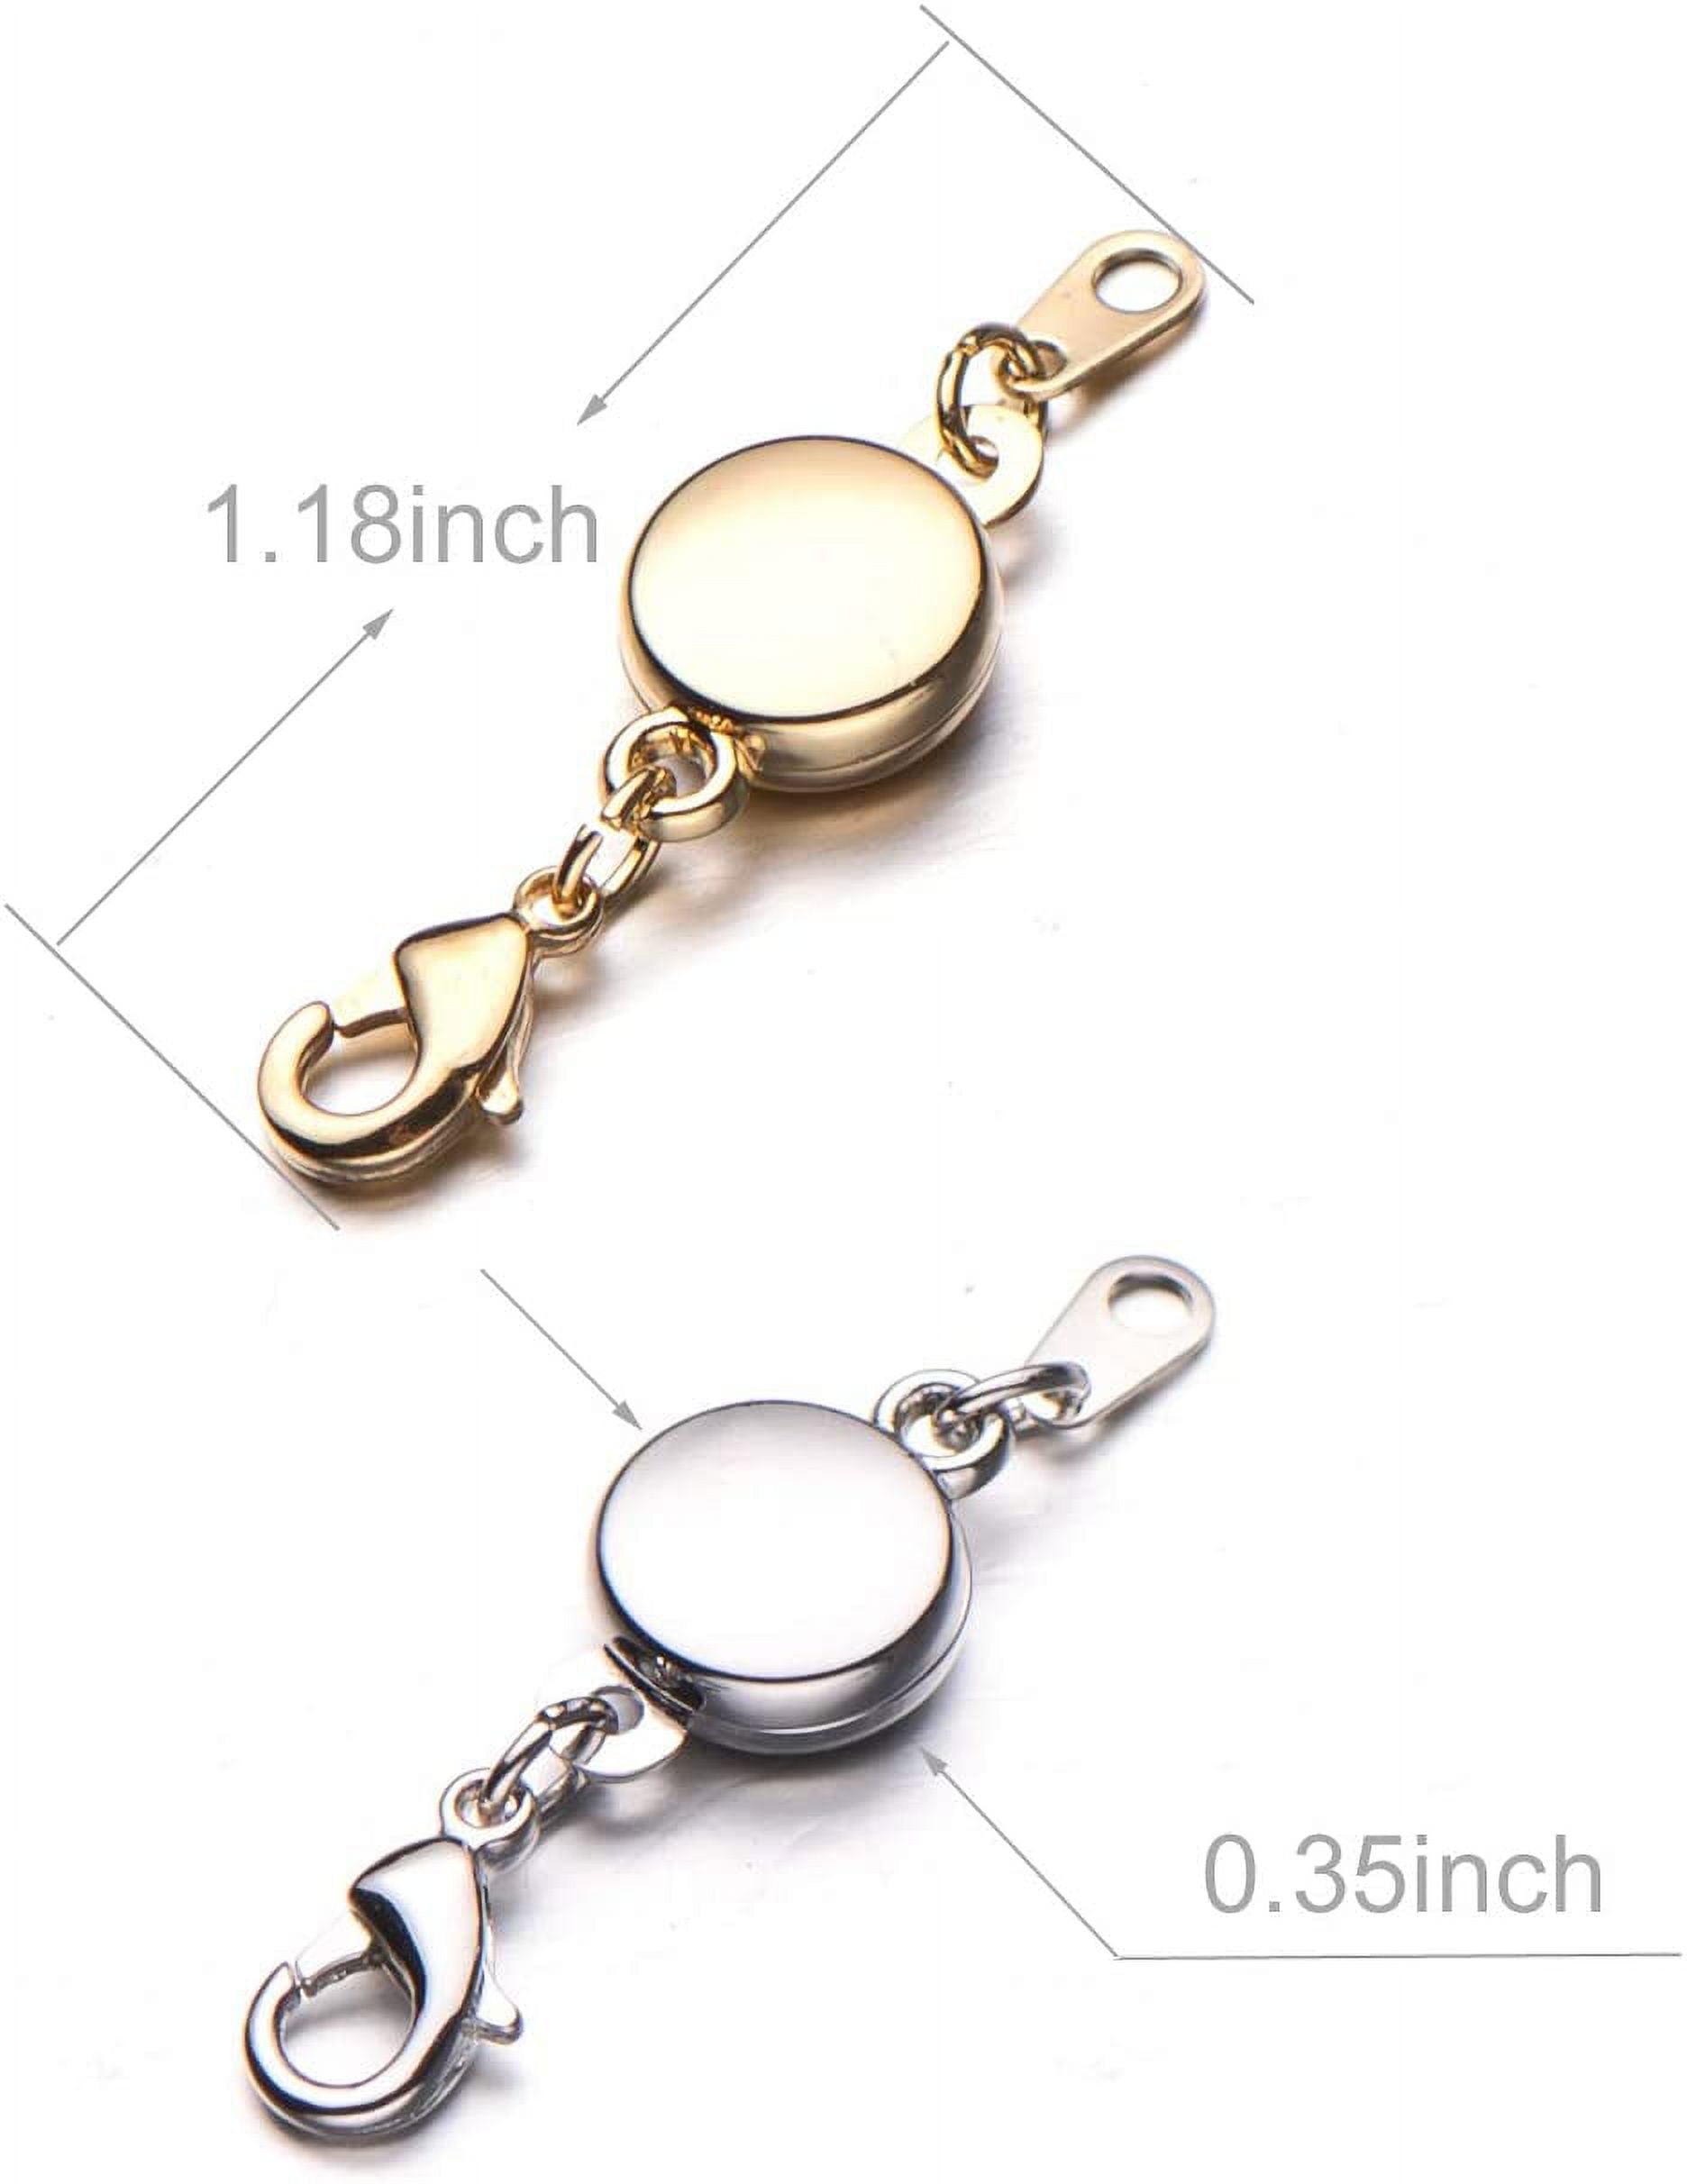  Zpsolution Layered Necklace Clasp, Locking Magnetic Multiple  Necklace Clasp Without Getting Tangled